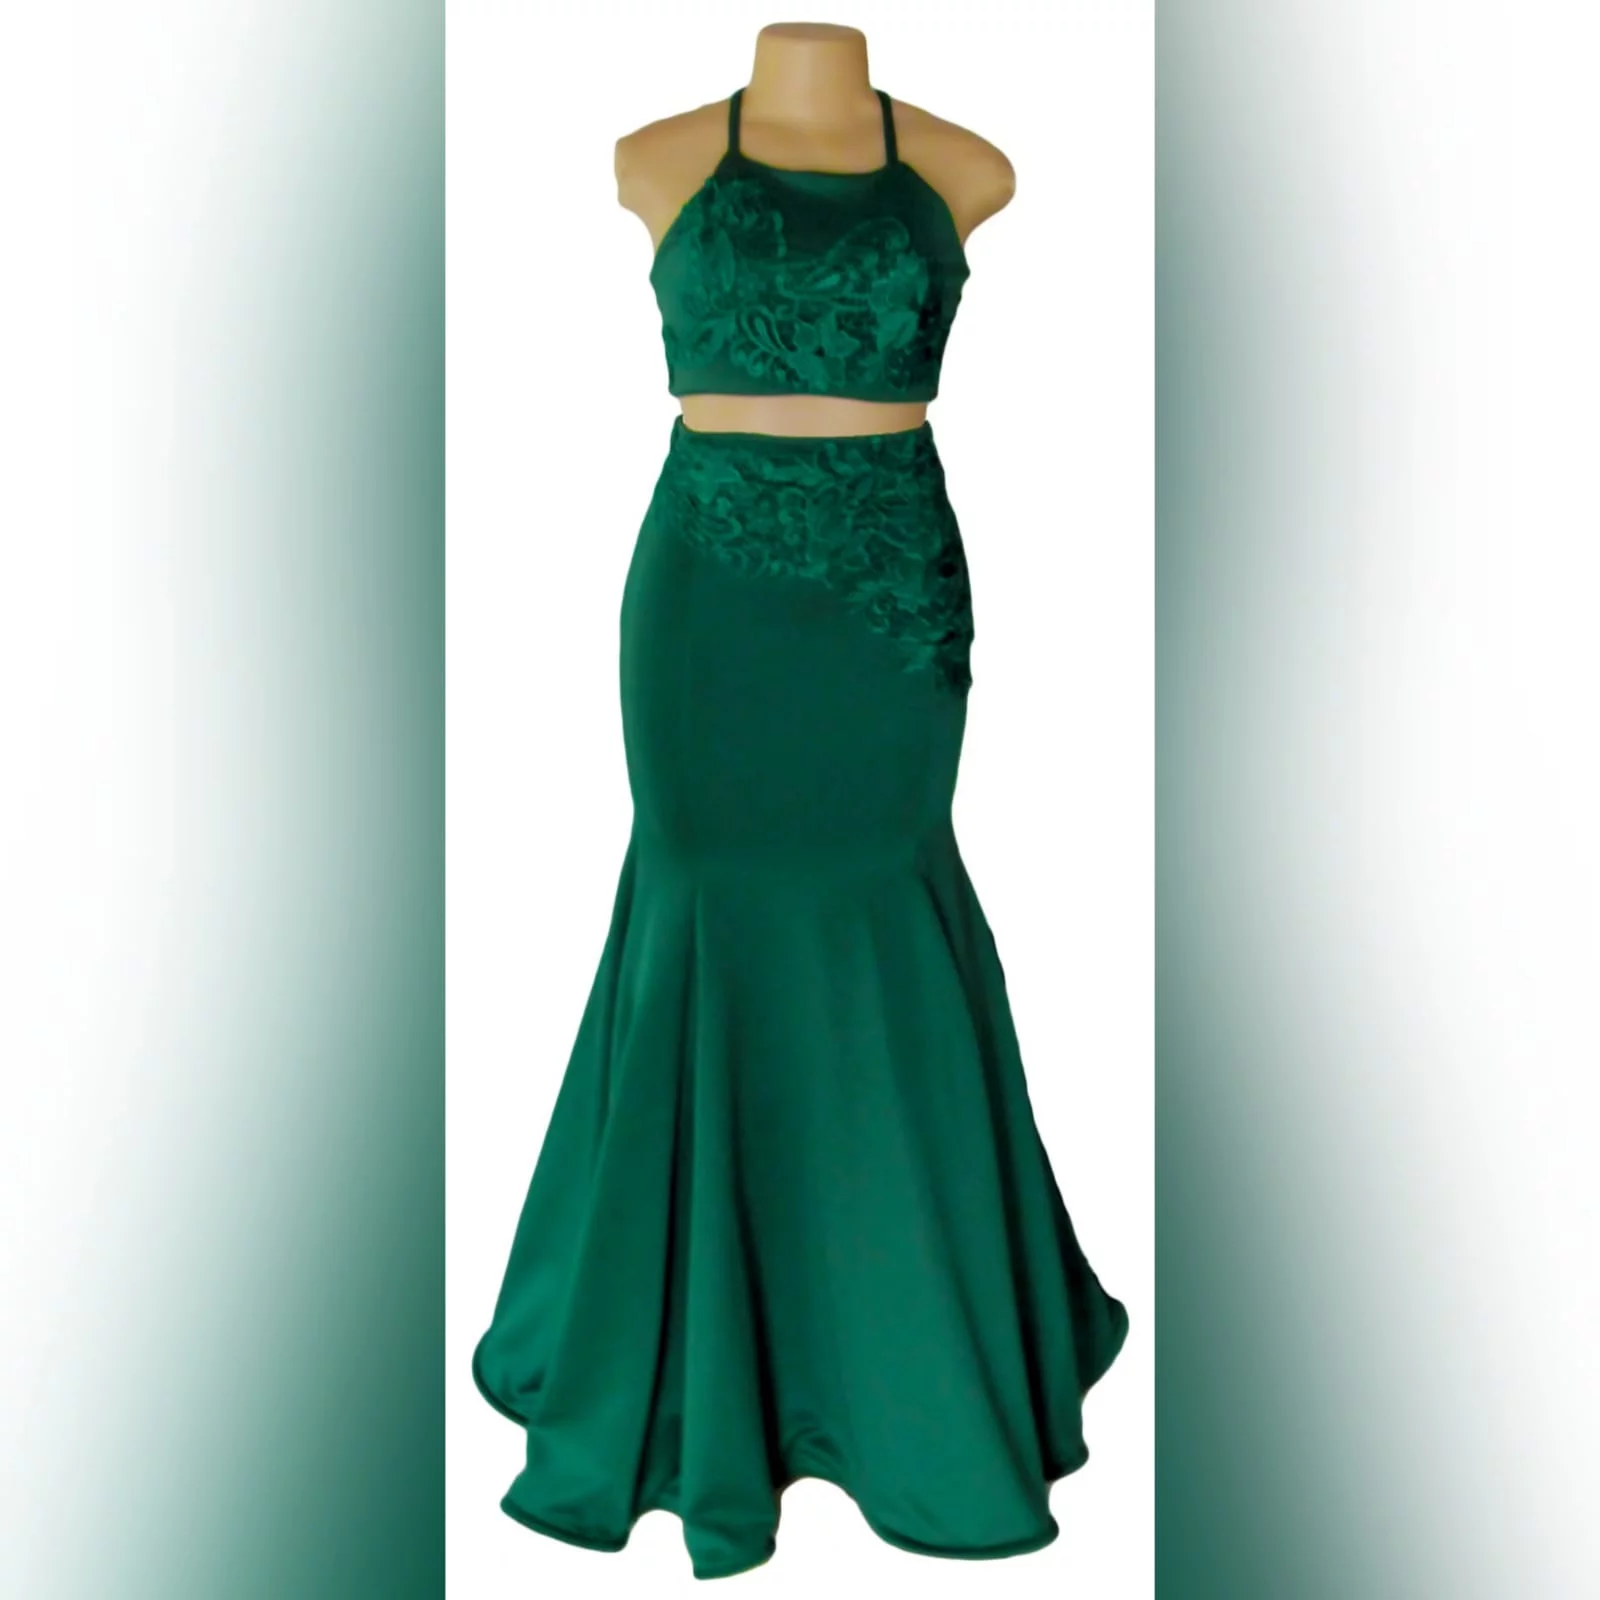 2 piece emerald green mermaid prom dress 5 2 piece emerald green mermaid prom dress. A gorgeous crop top with a lace-up open back, with a mermaid skirt. Lace detail on skirt and top for a classic touch.